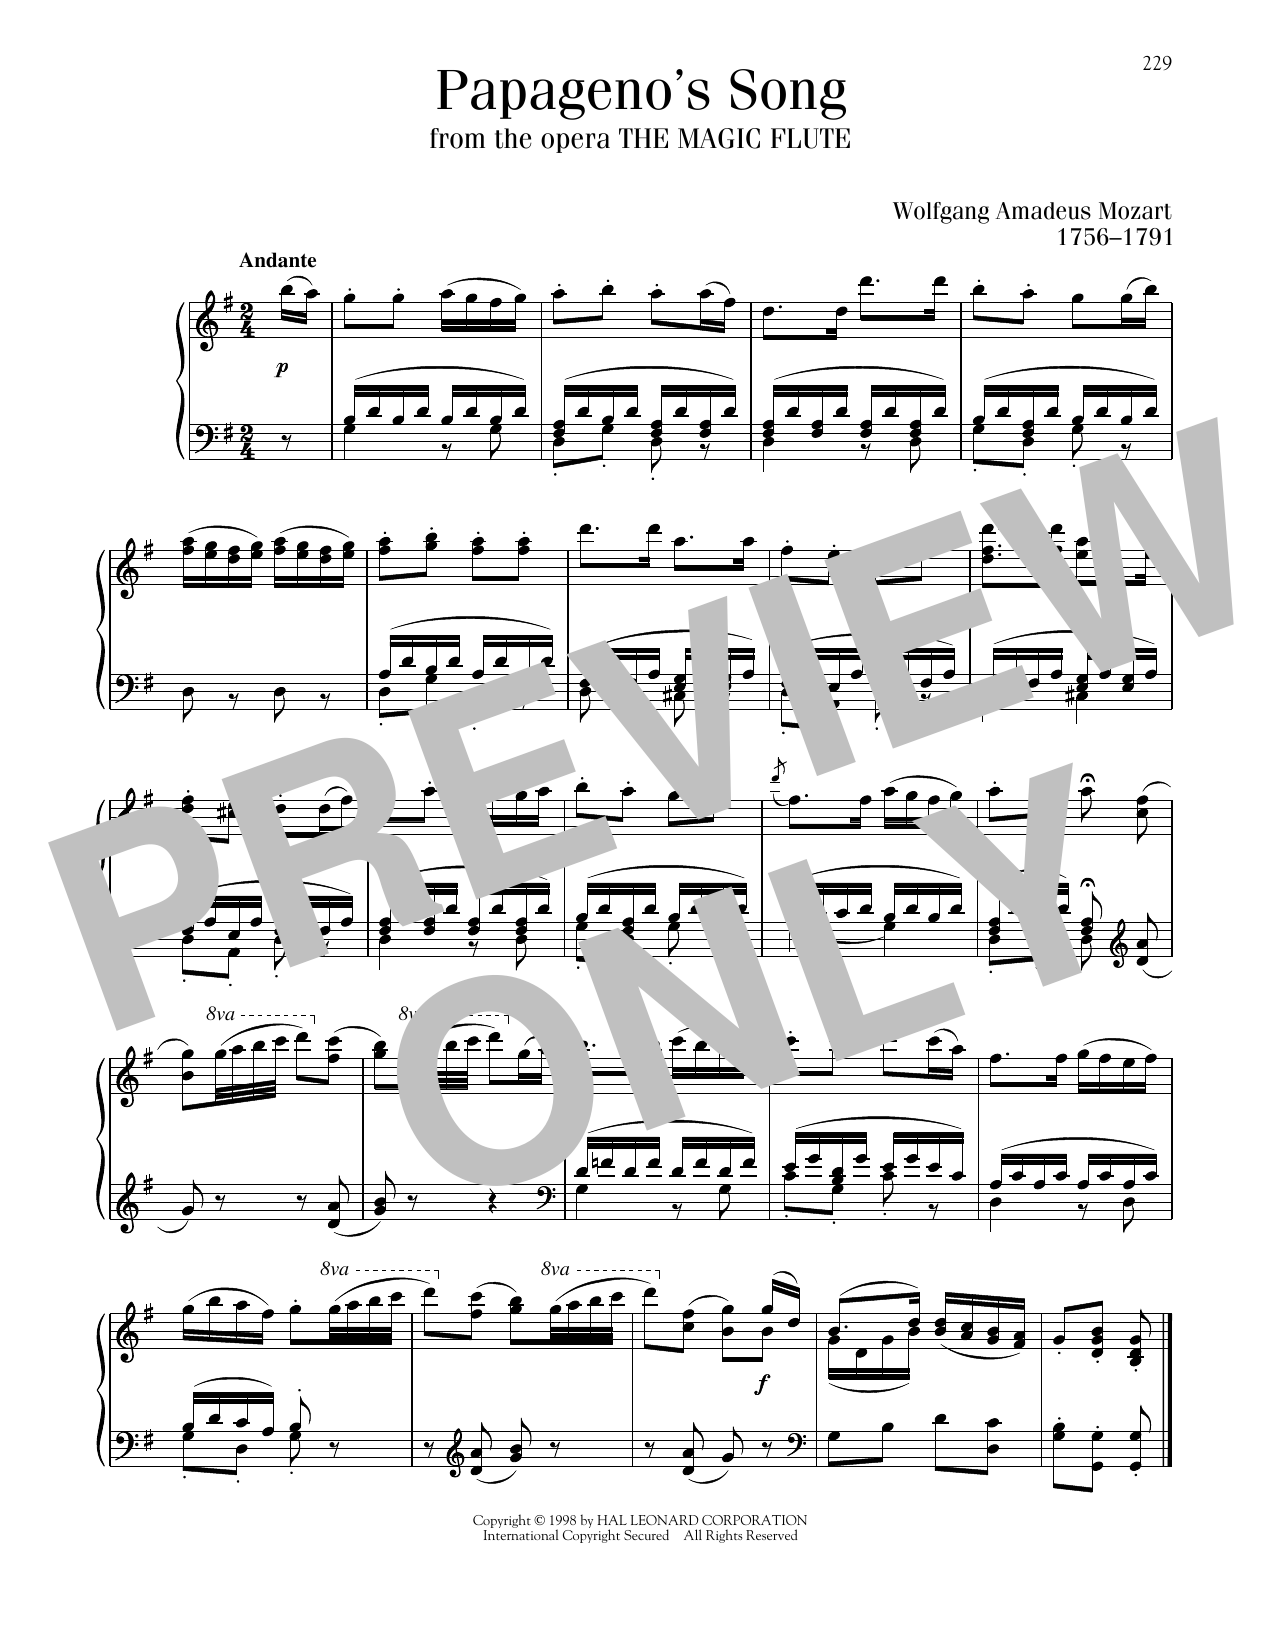 Wolfgang Amadeus Mozart Ein Madchen Oder Weibchen (Papageno's Song) sheet music notes printable PDF score